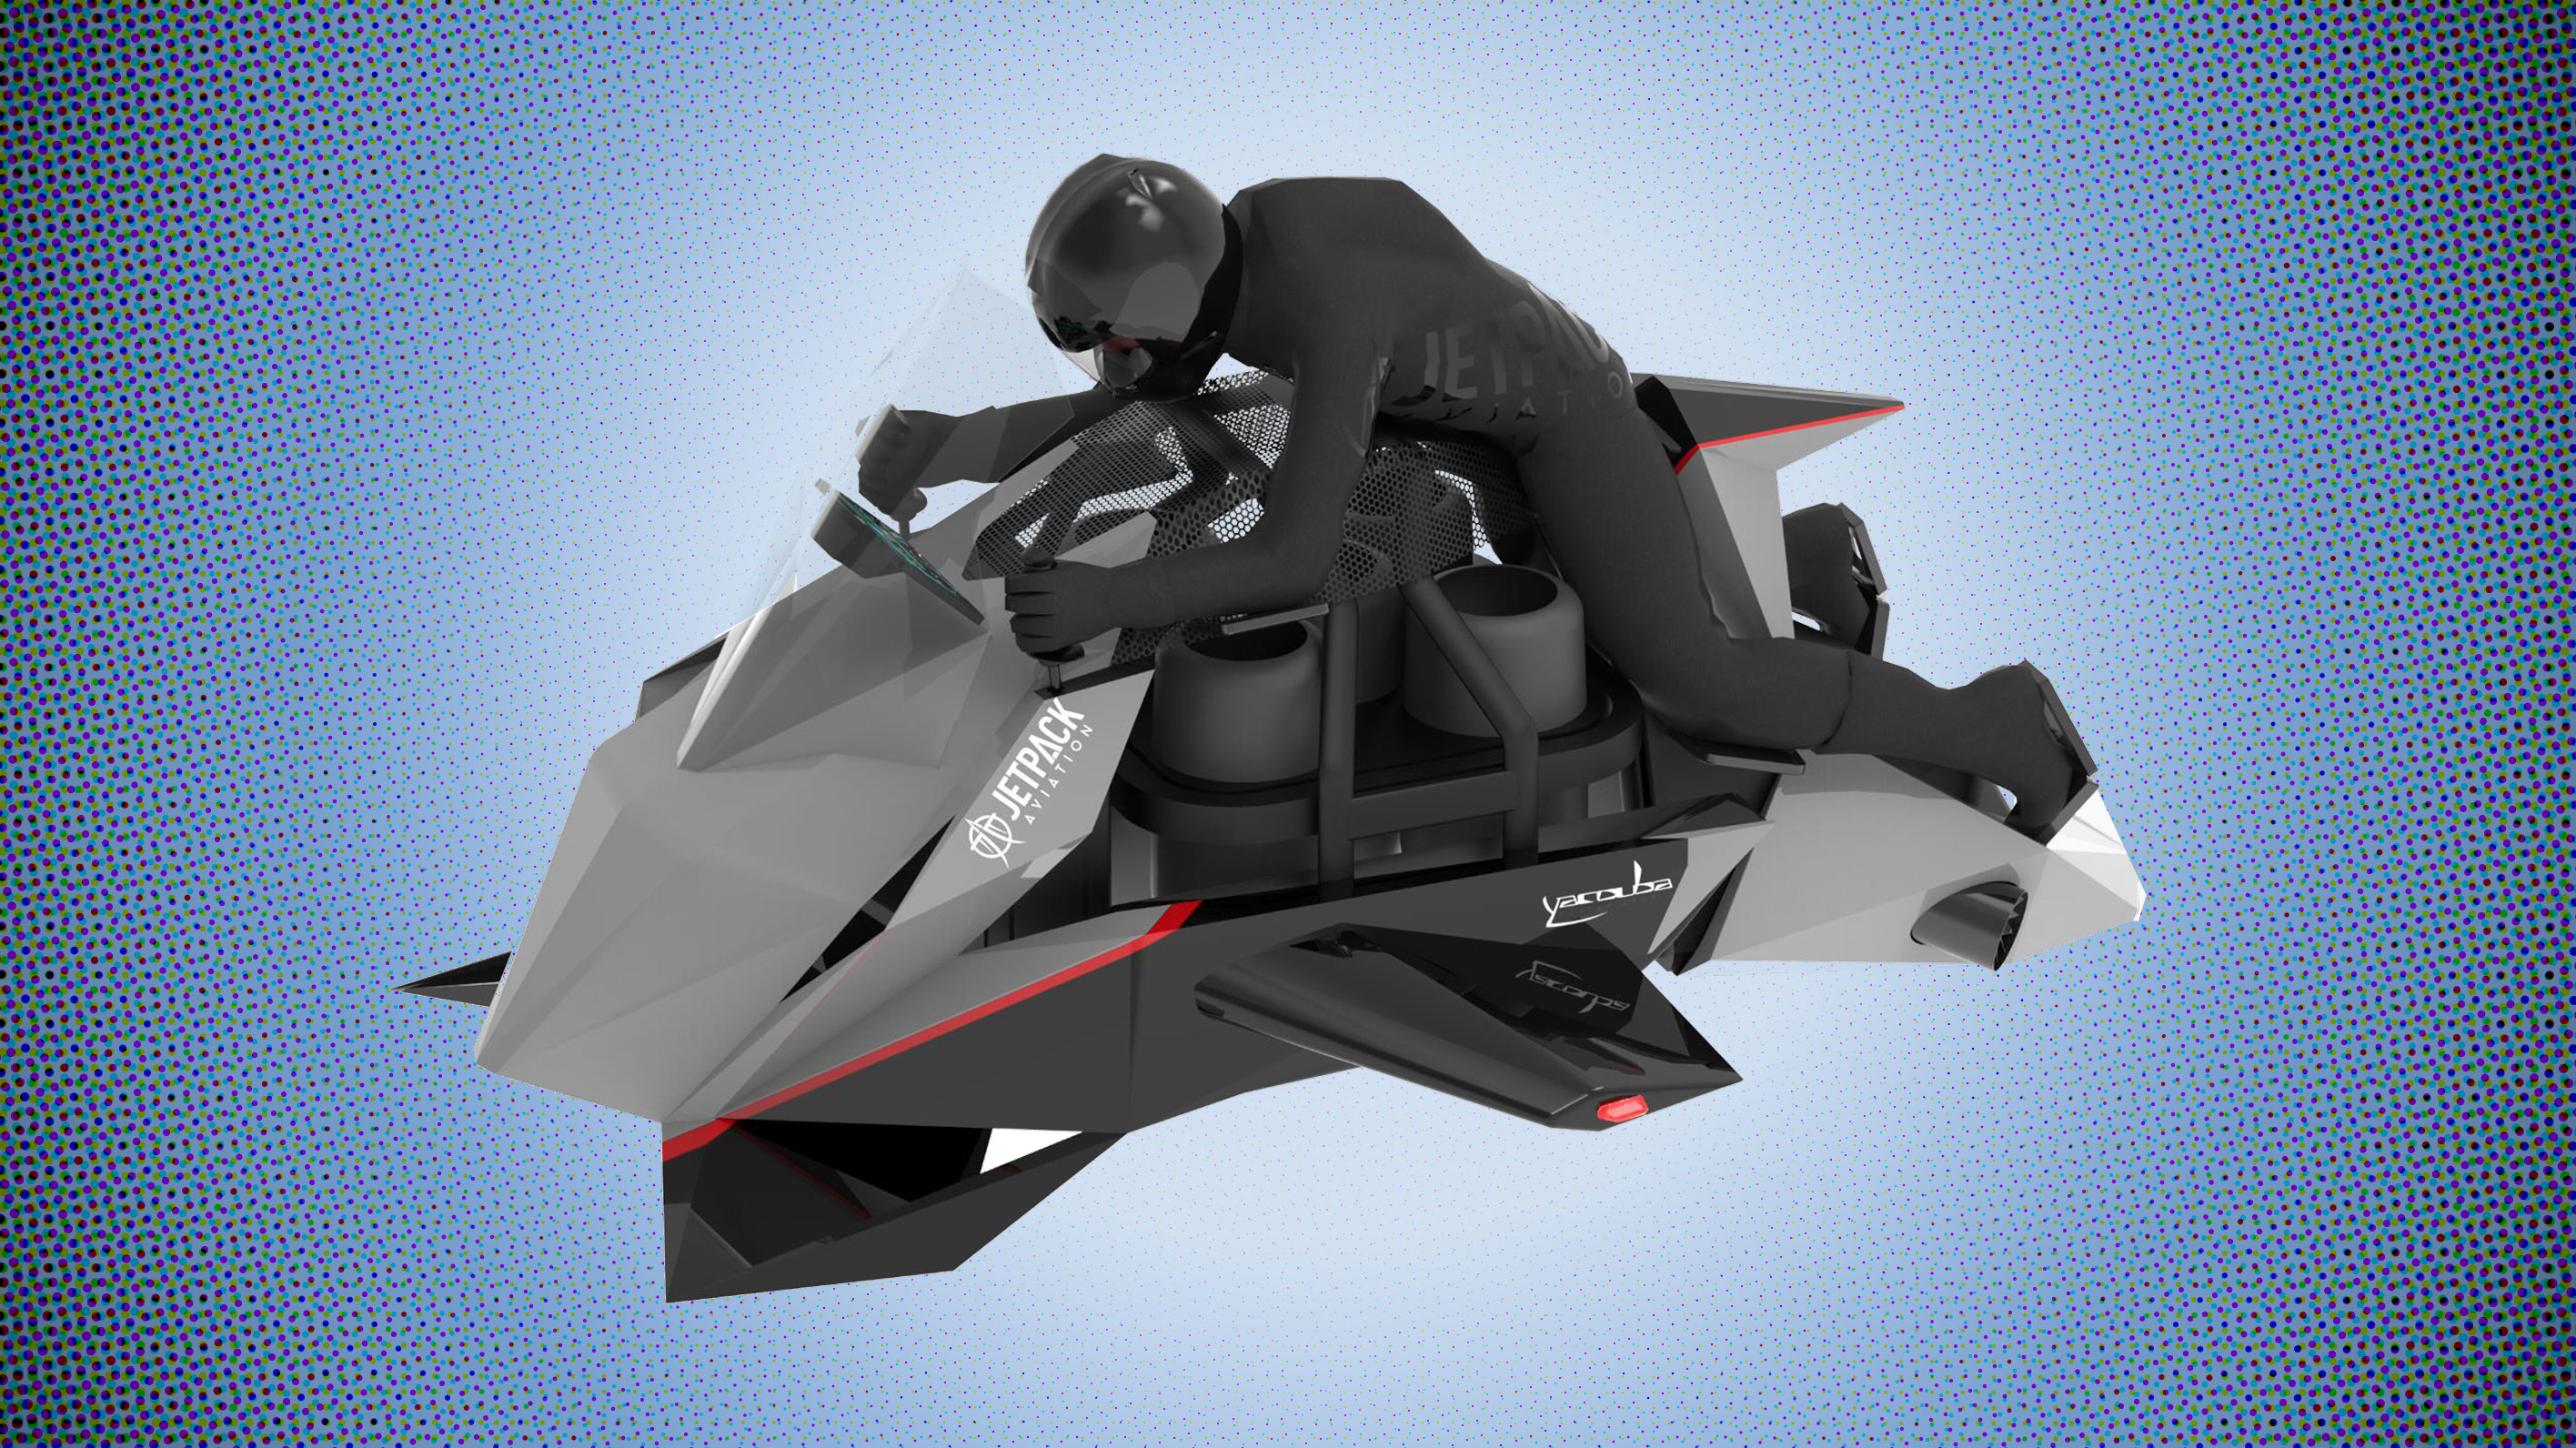 Image result for An American company says it is creating a flying motorcycle.